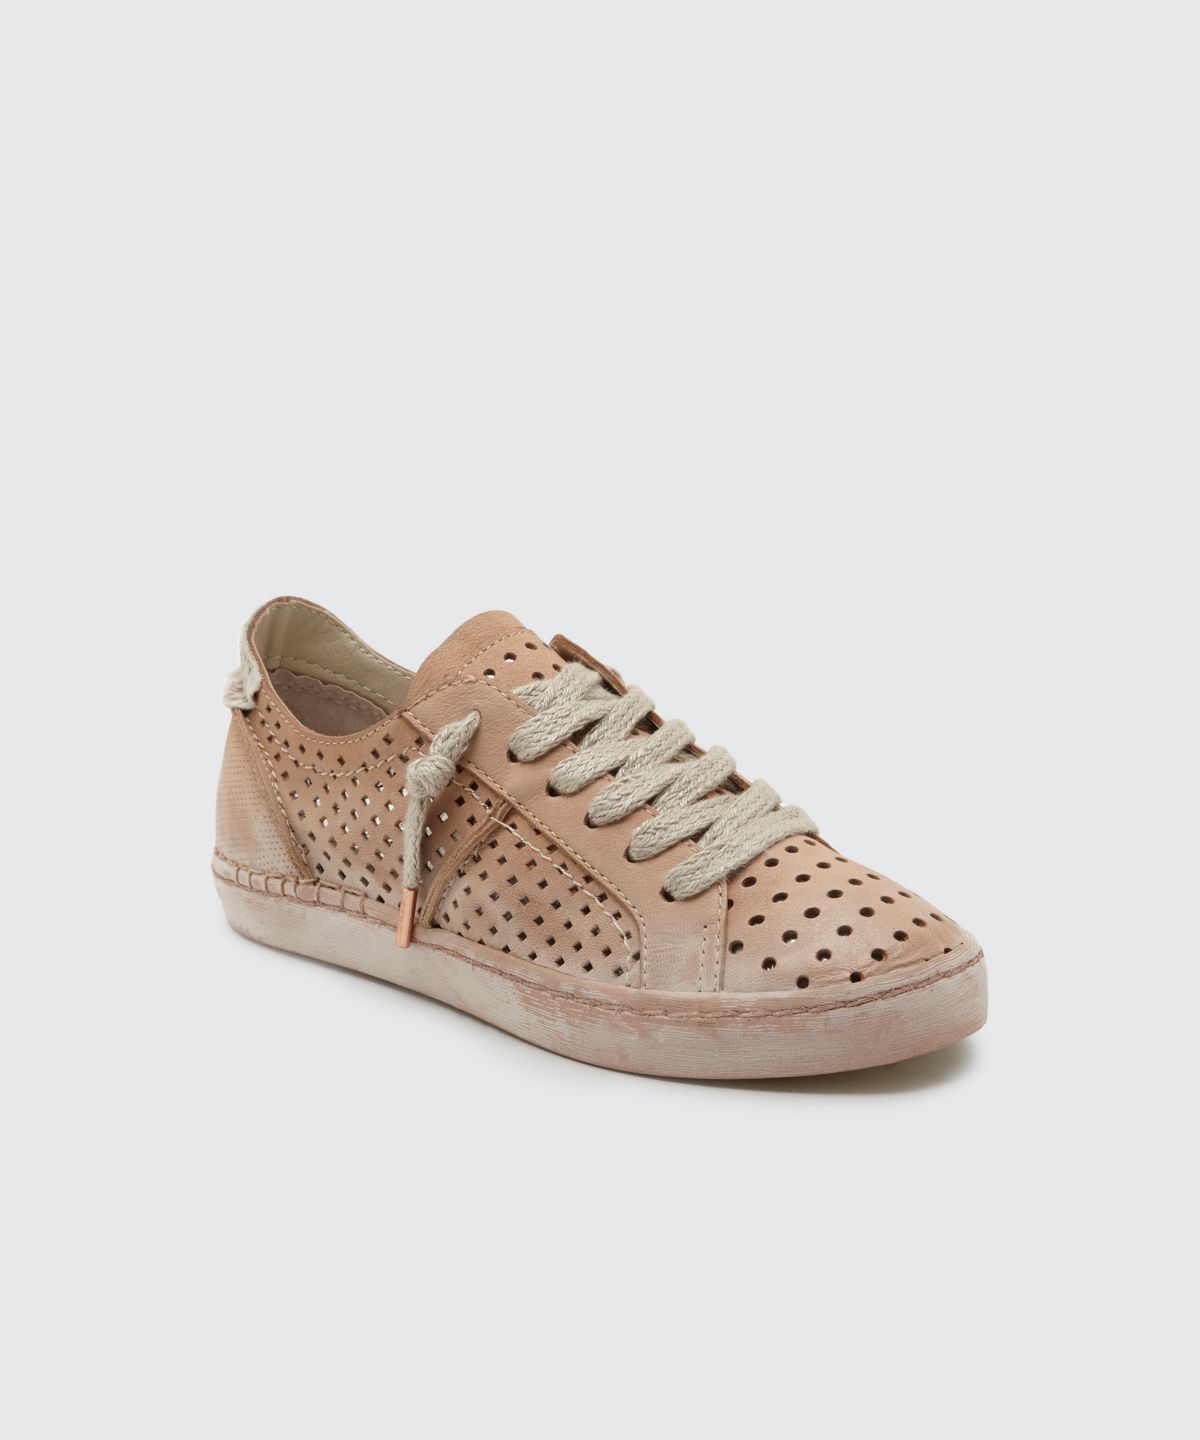 blush pink perforated sneakers